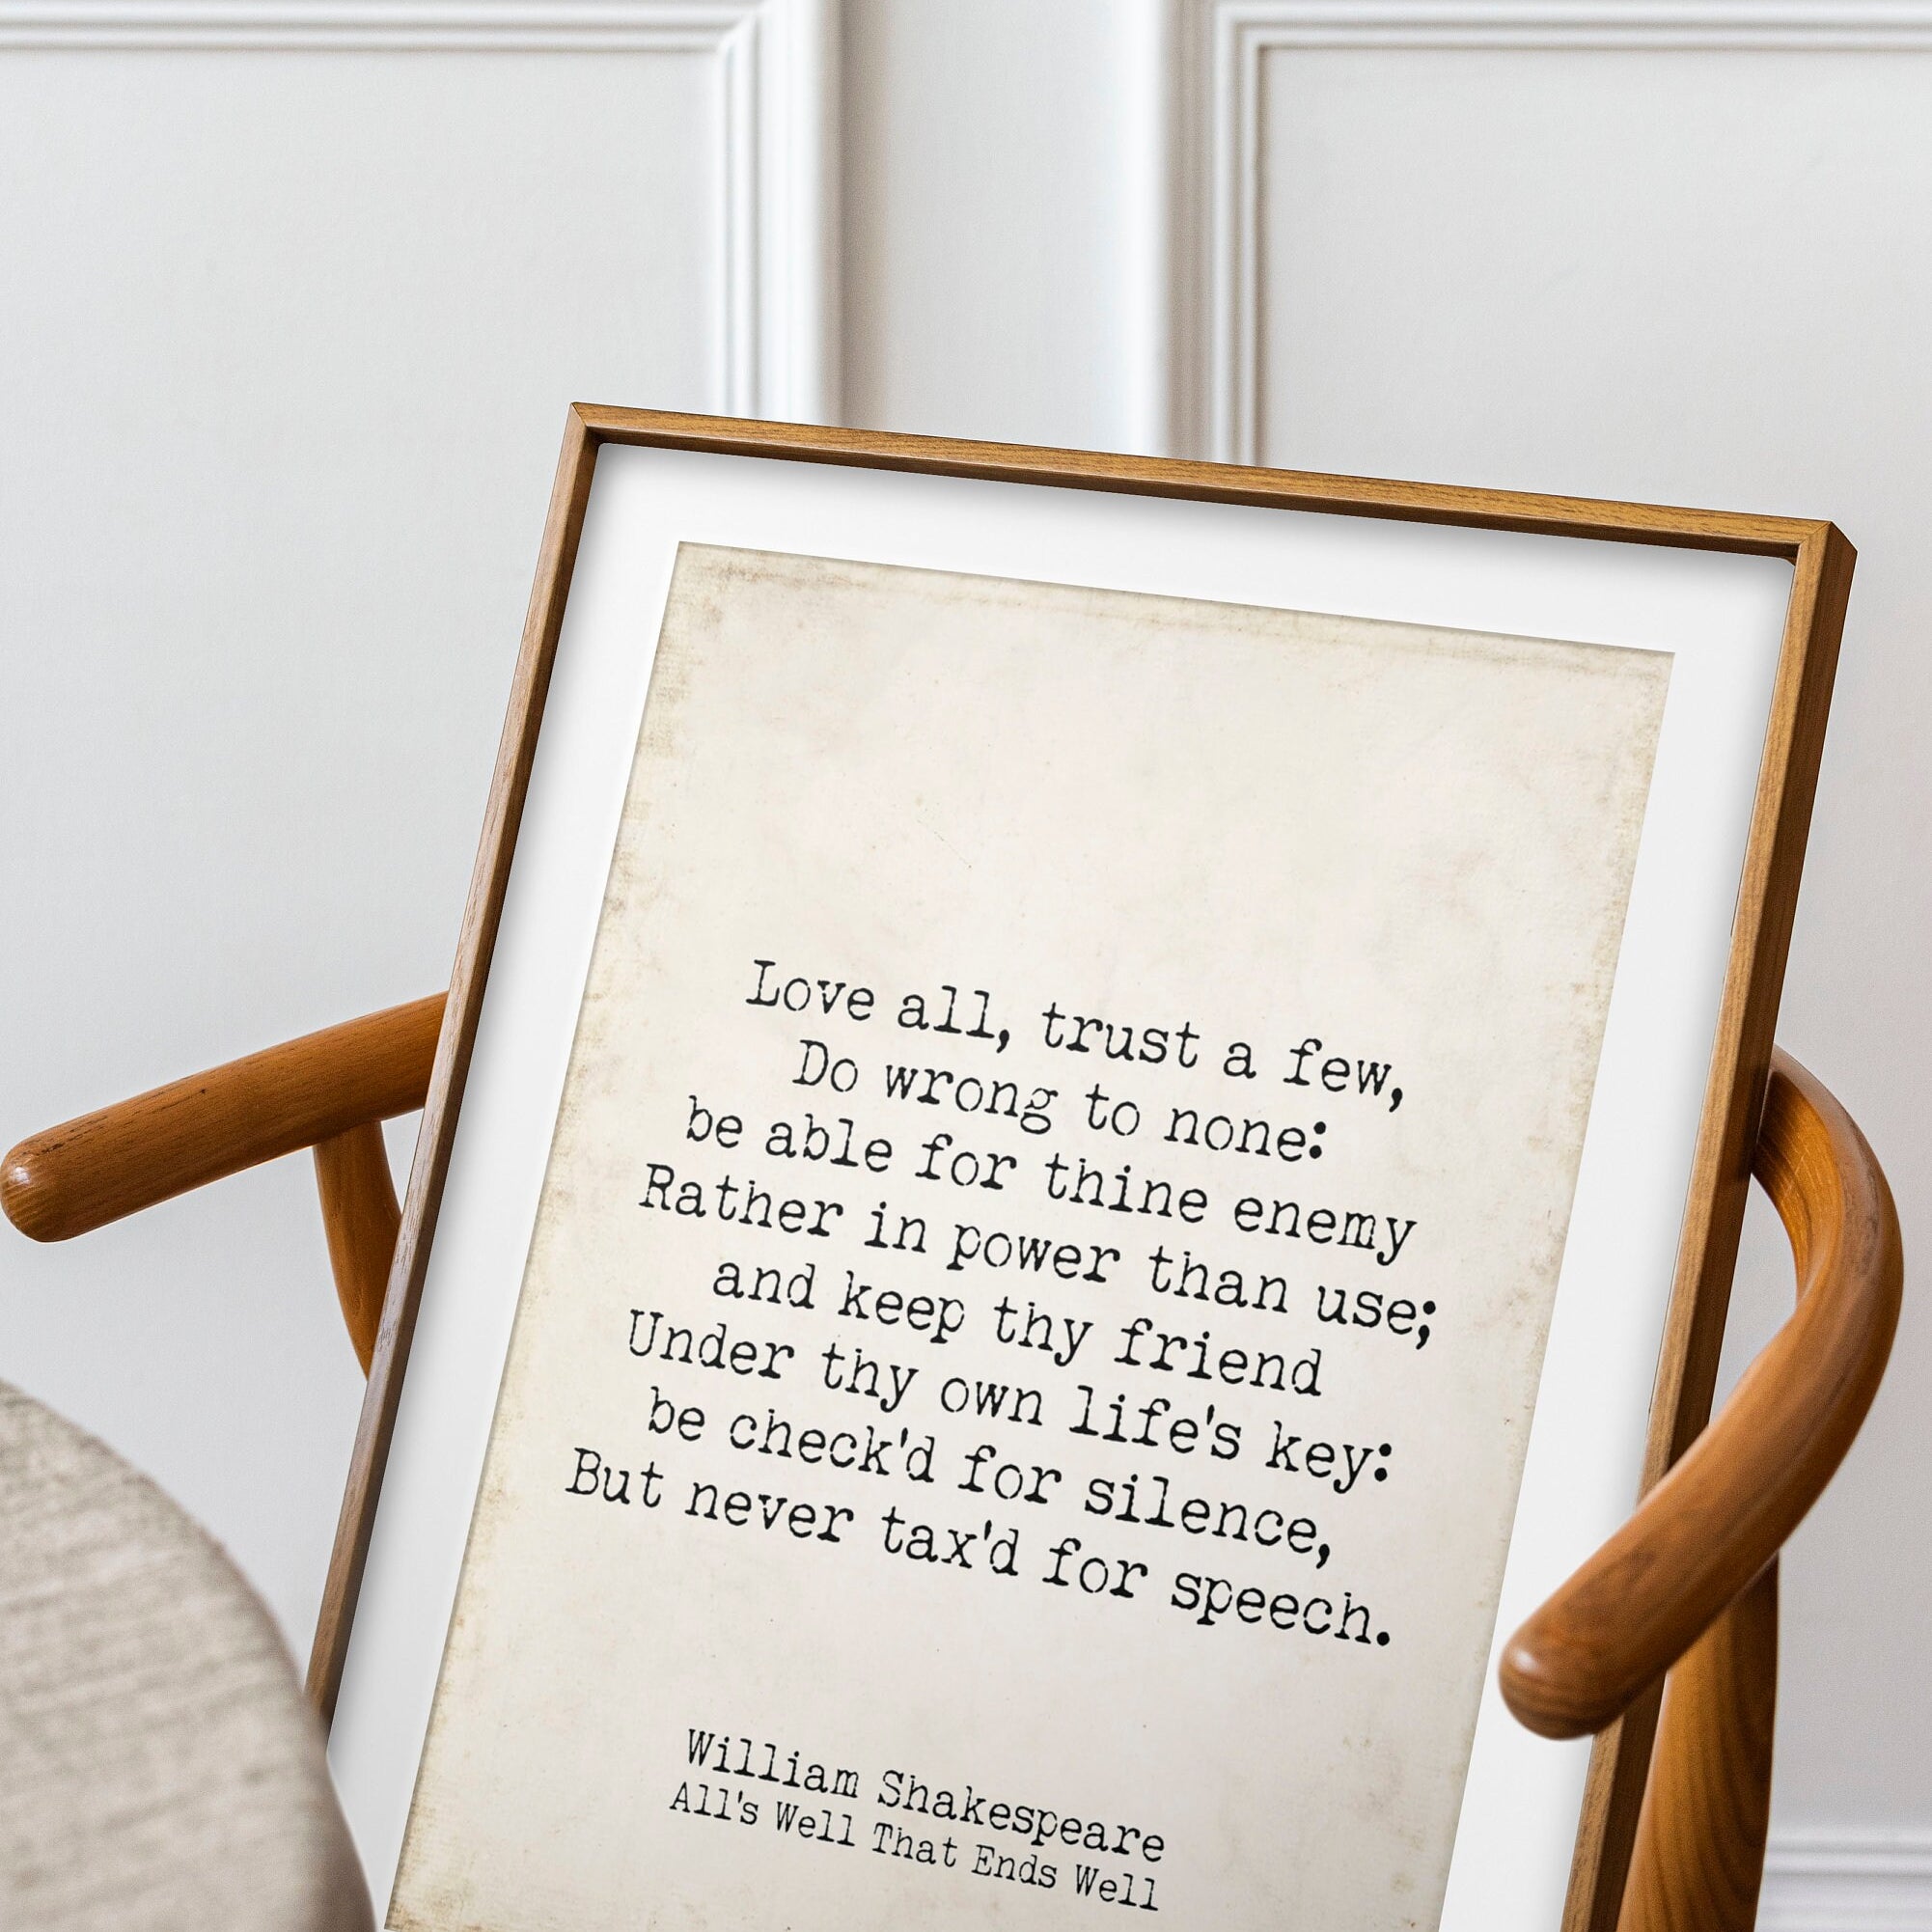 Shakespeare Quote From All's Well That Ends Well, Inspirational Gift Idea, Black and White Wall Art Print, Love all, trust a few